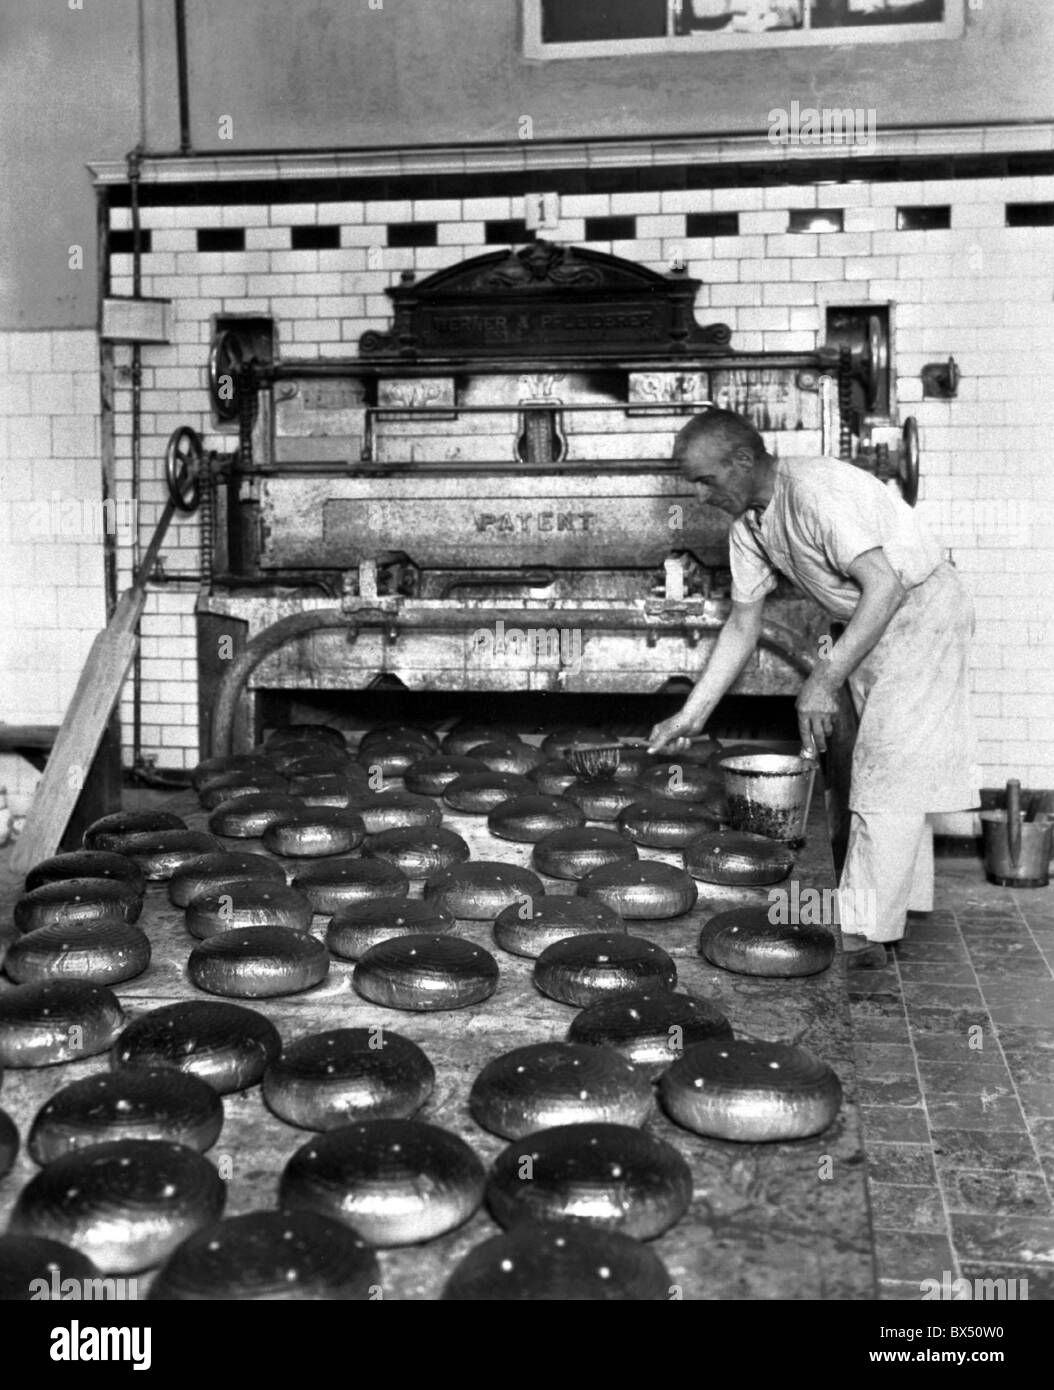 Czechoslovakia 1937, vintage photograph of bakery. Bread loafs being buttered. Stock Photo